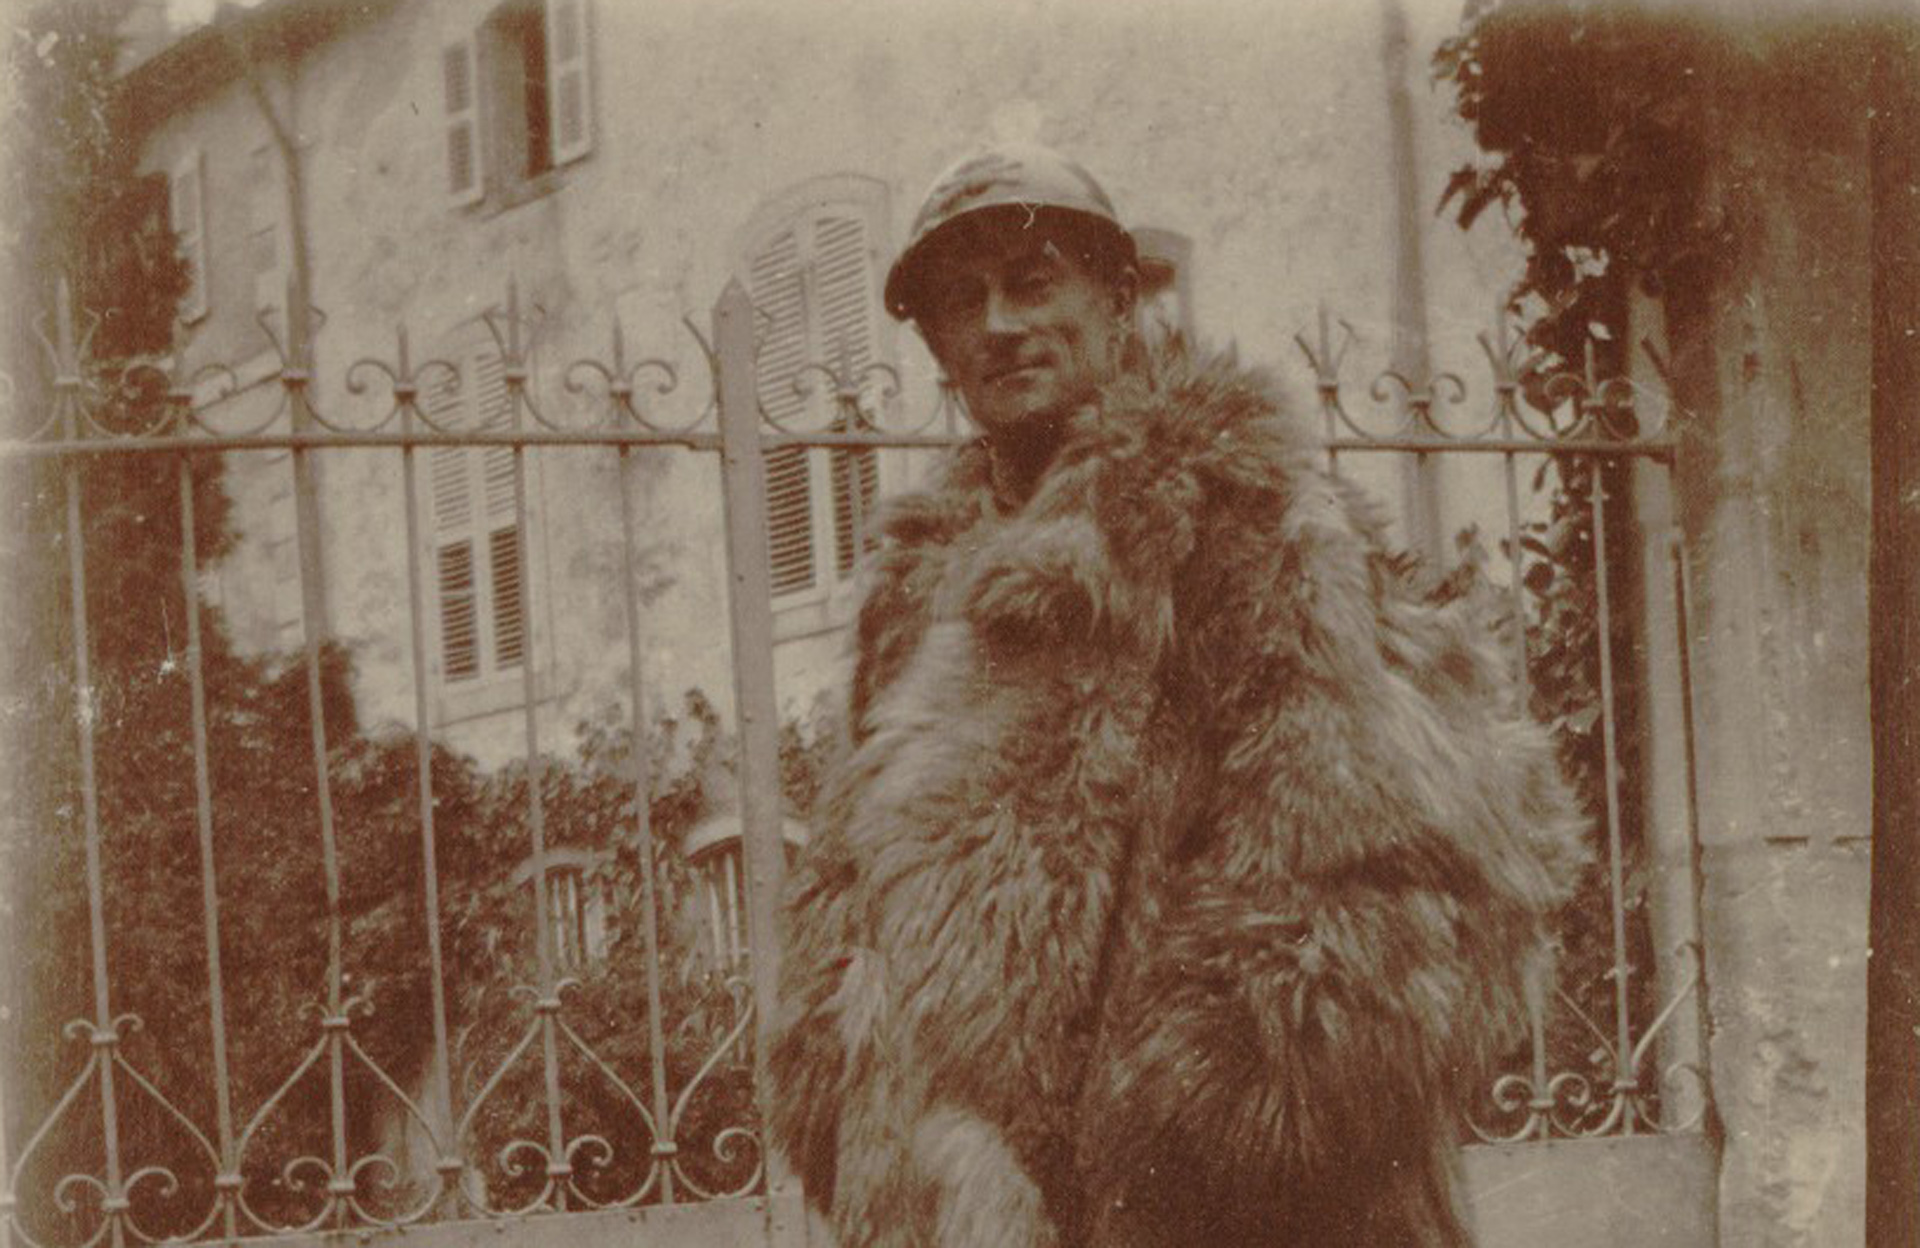 Maurice Ravel as a soldier.